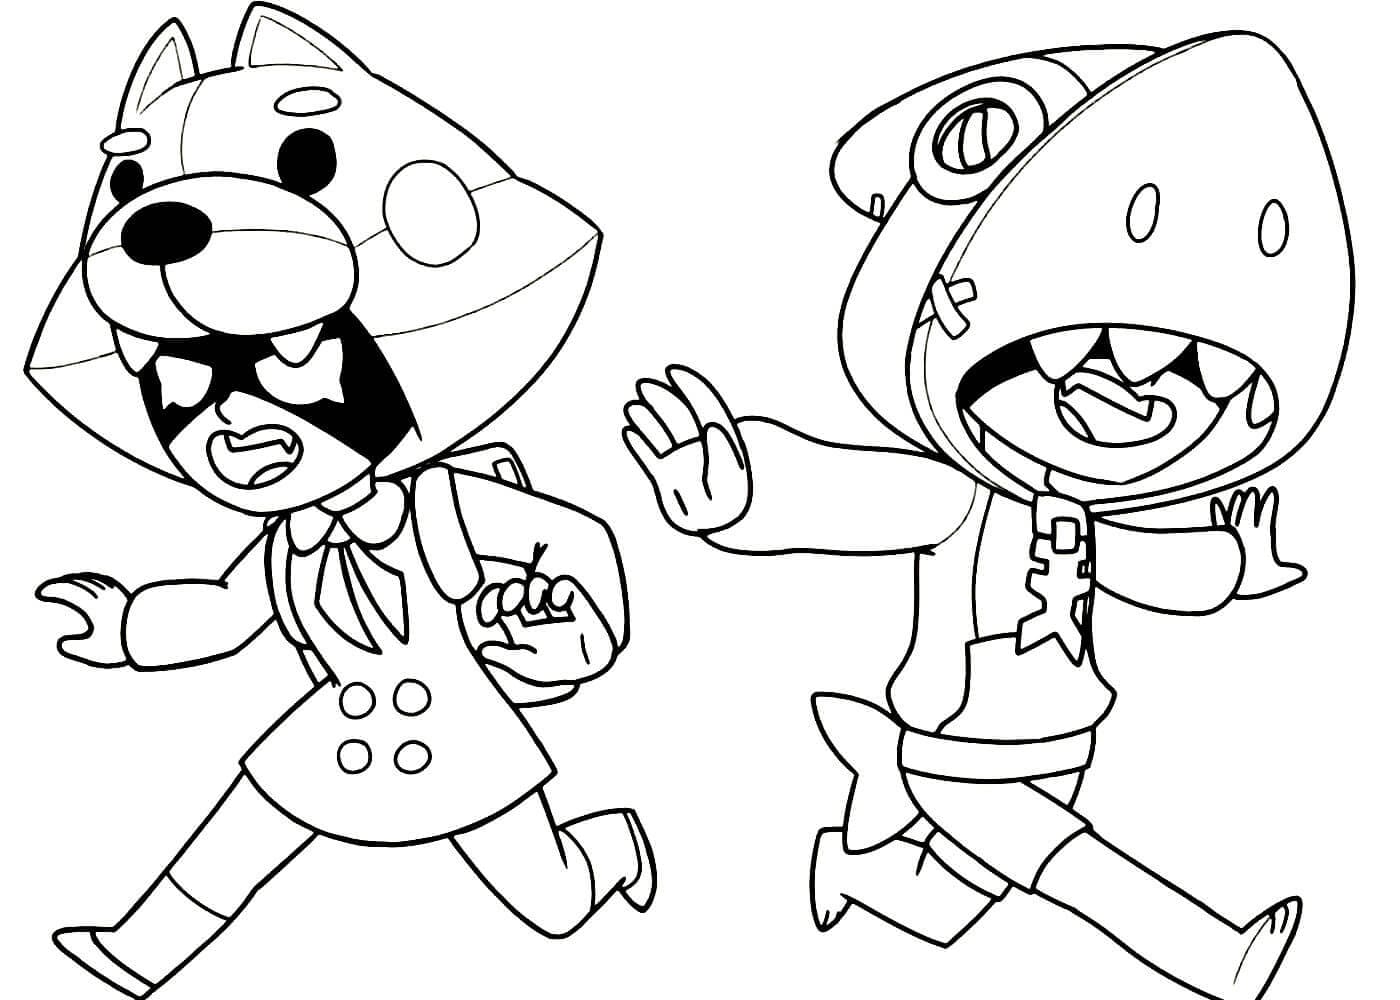 Leon Brawl Stars Coloring Pages Print For Free Wonder Day Coloring Pages For Children And Adults - colorir nita brawl stars